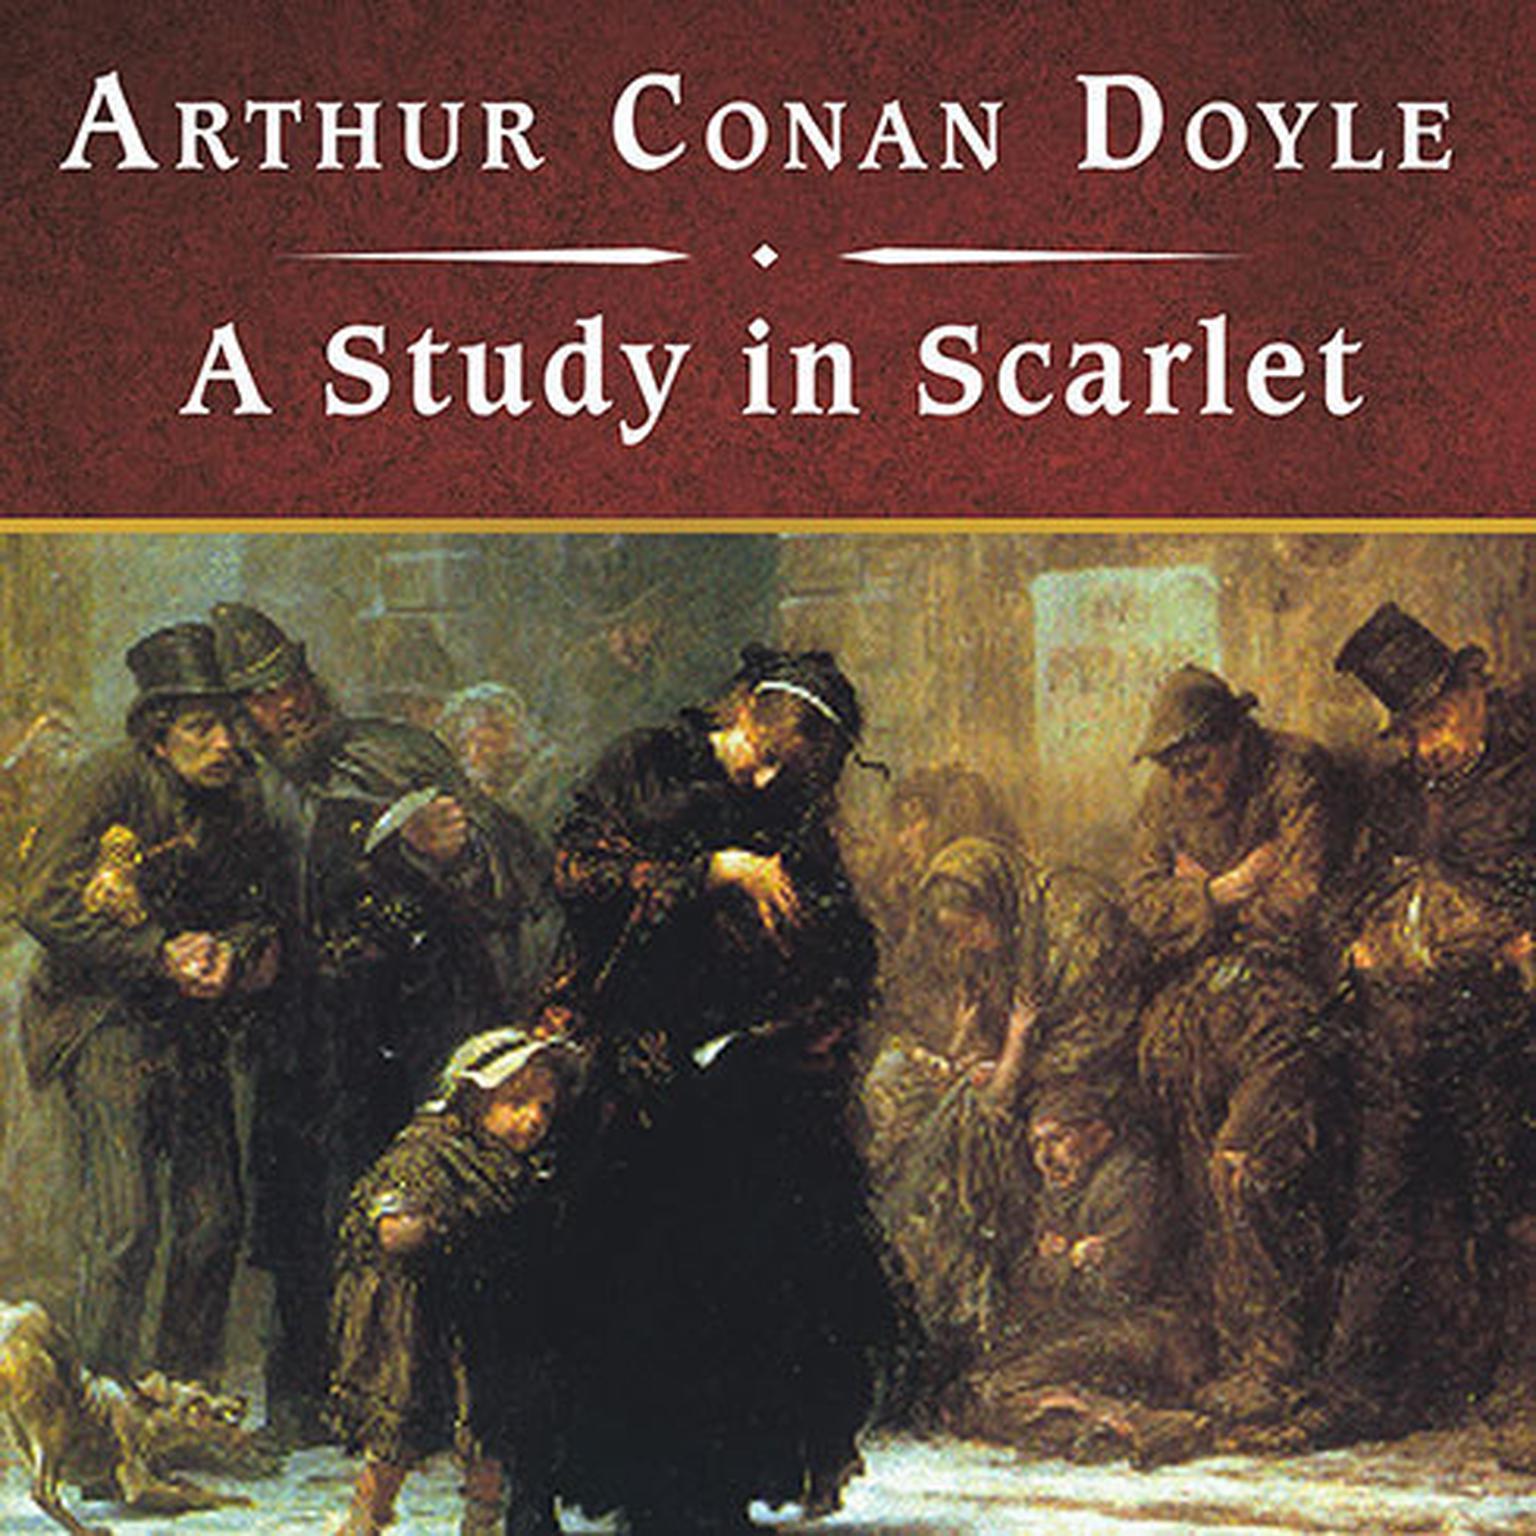 A Study in Scarlet, with eBook Audiobook, by Arthur Conan Doyle